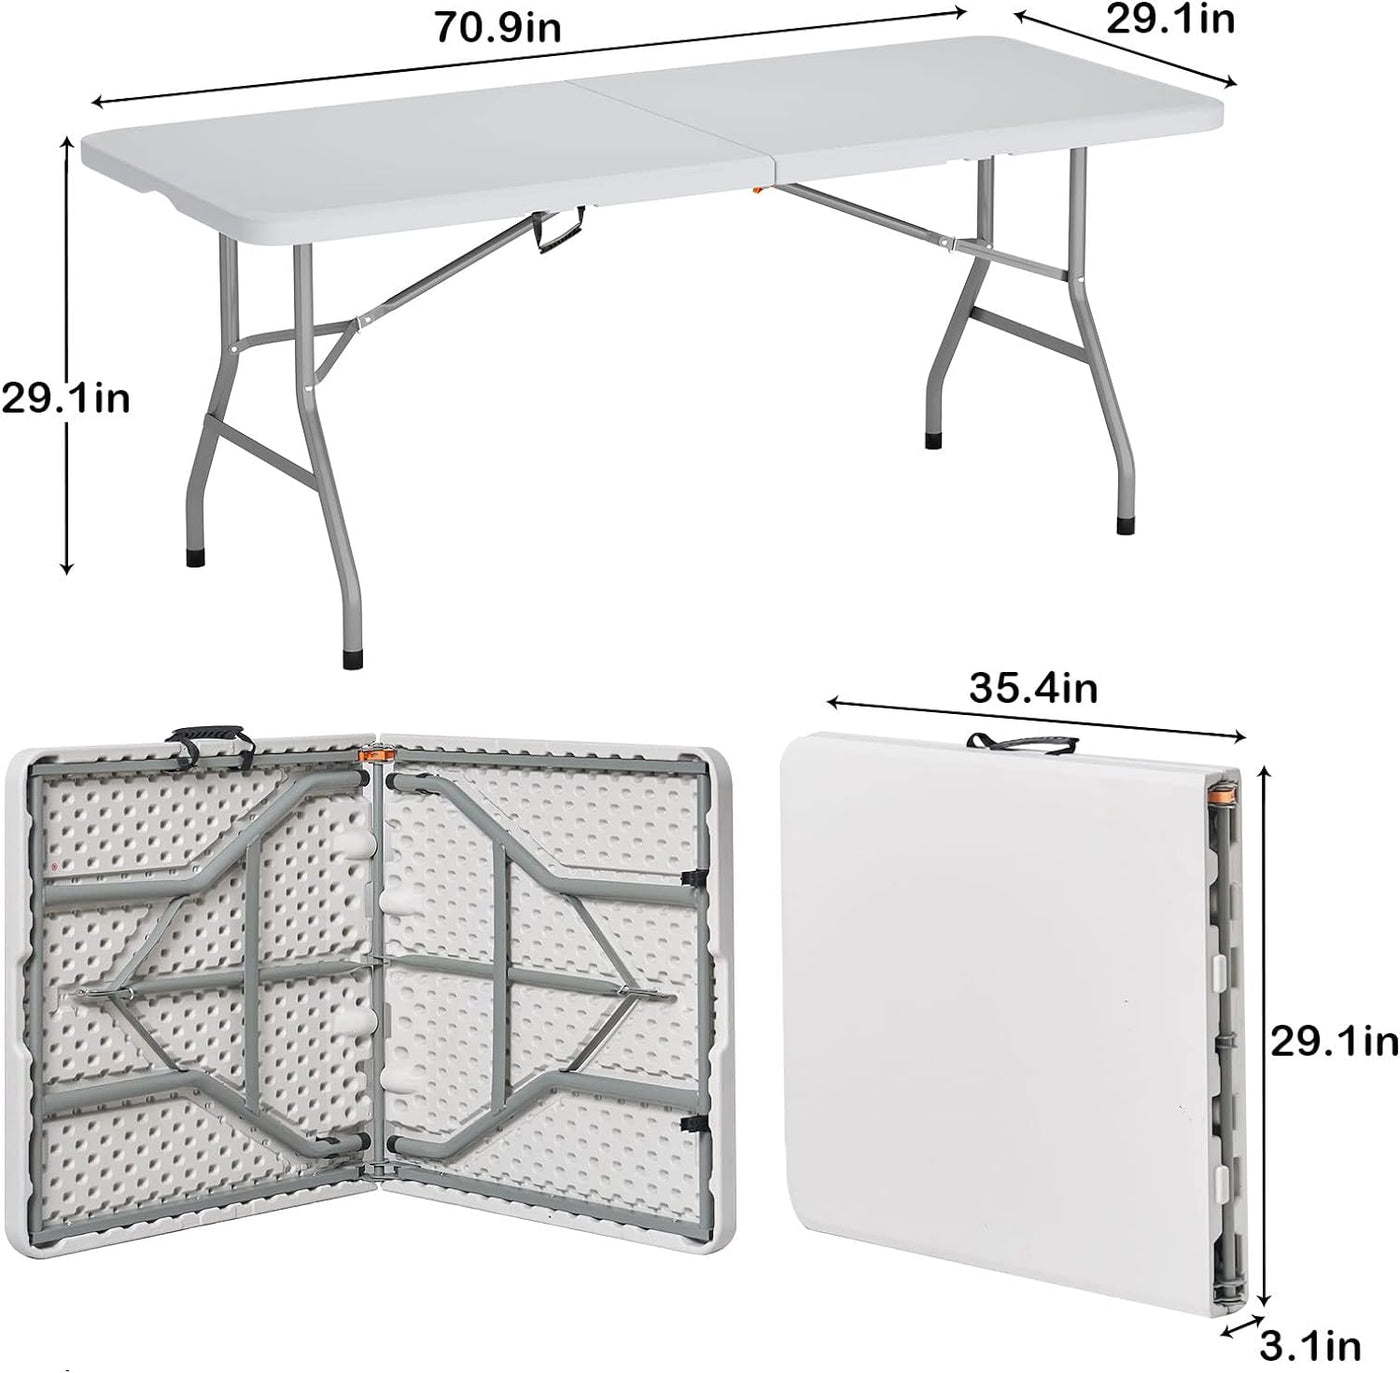 Folding Table 6ft Heavy Duty Plastic Event Folding Table with Carrying Handle